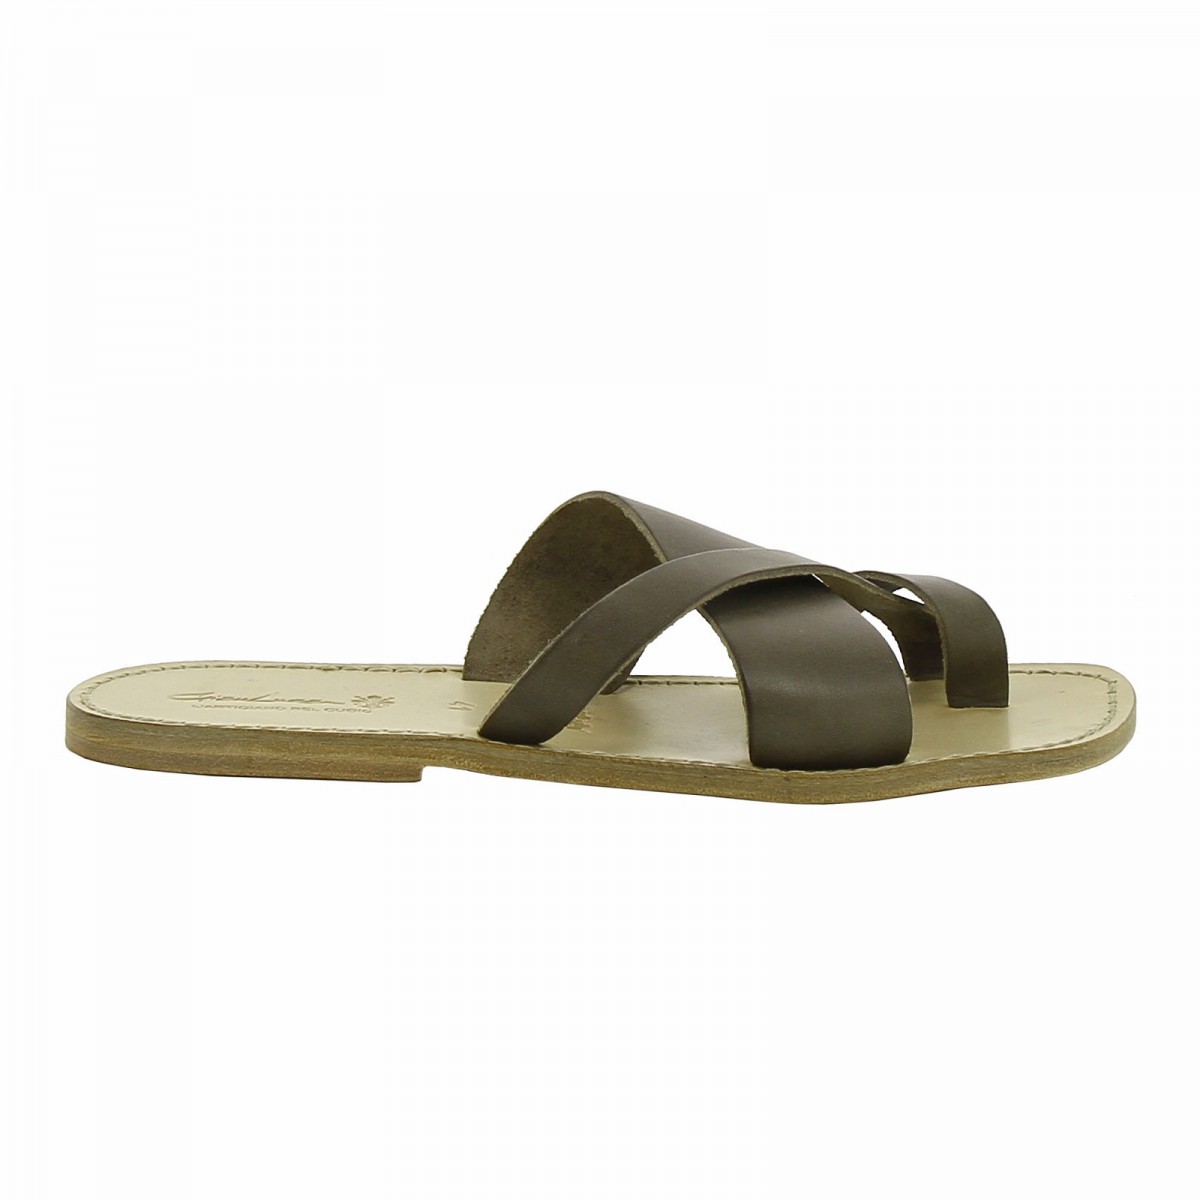 Leather thongs sandals for men in mud color | The leather craftsmen